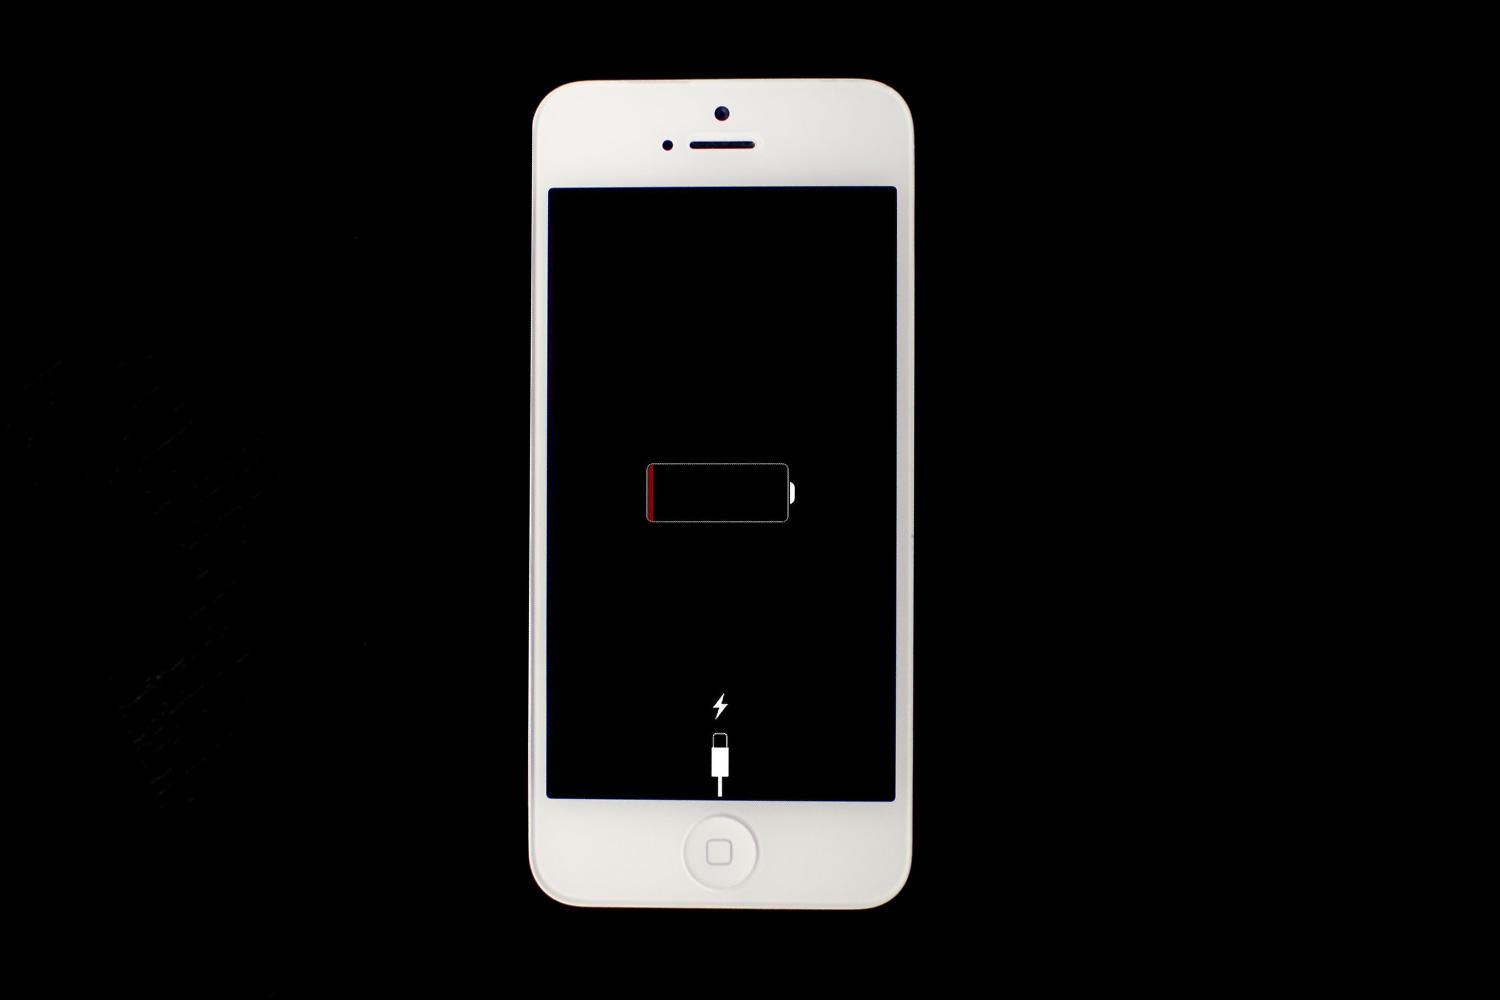 Giant Iphone 6 Is Great But We Really Need A Giant Iphone 6 Battery